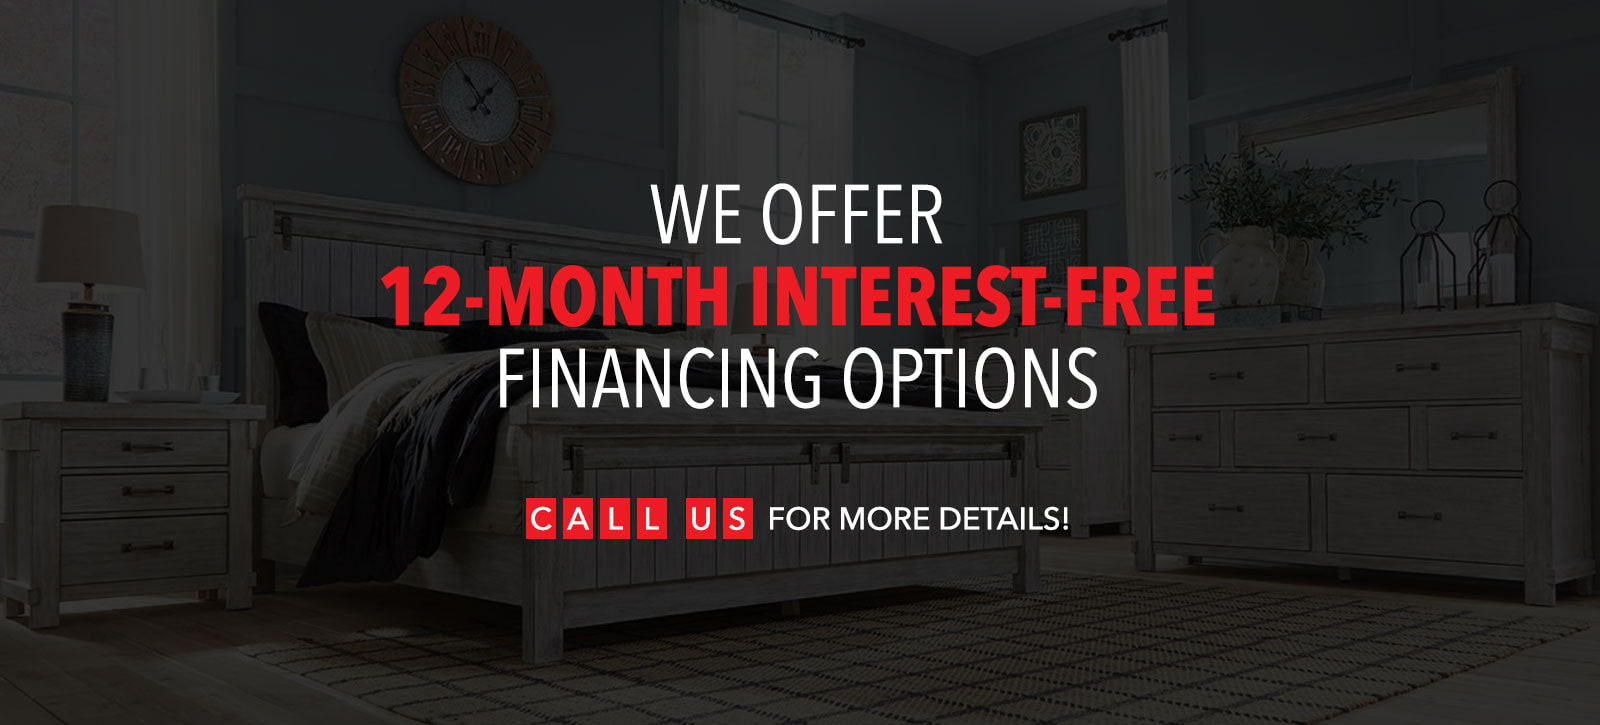 We offer 12-month interest-free financing options